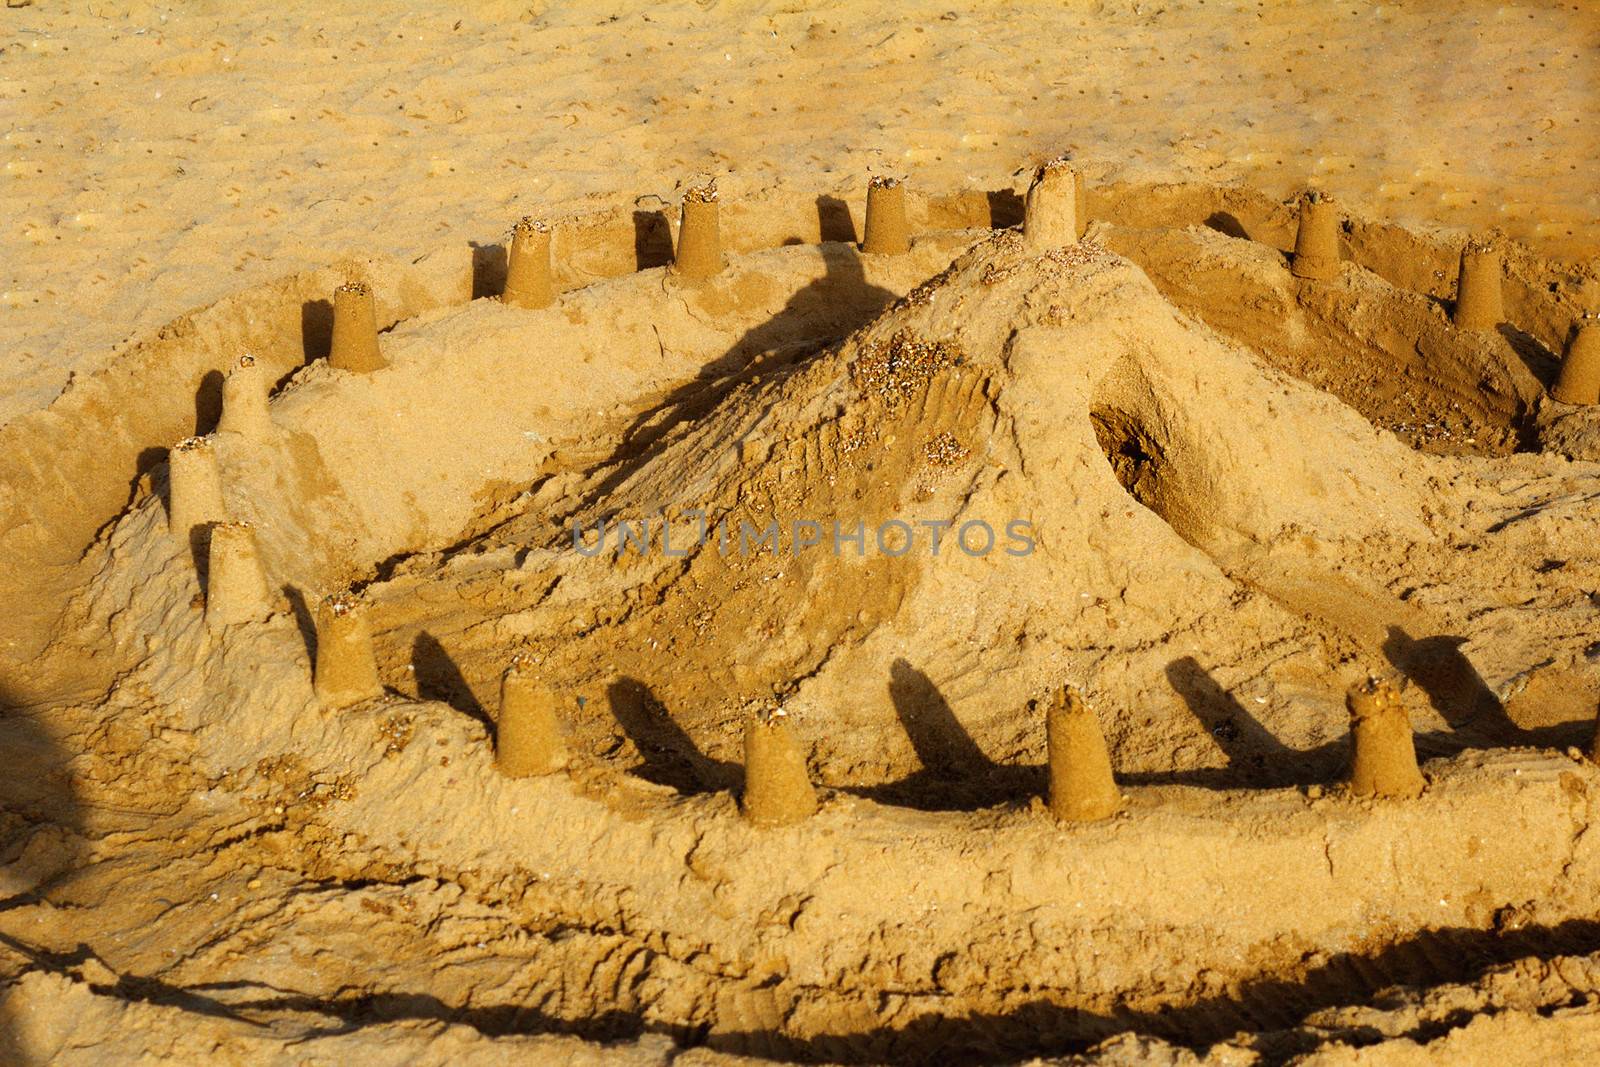 The castle and the fortress wall, built children of sand on a be by georgina198